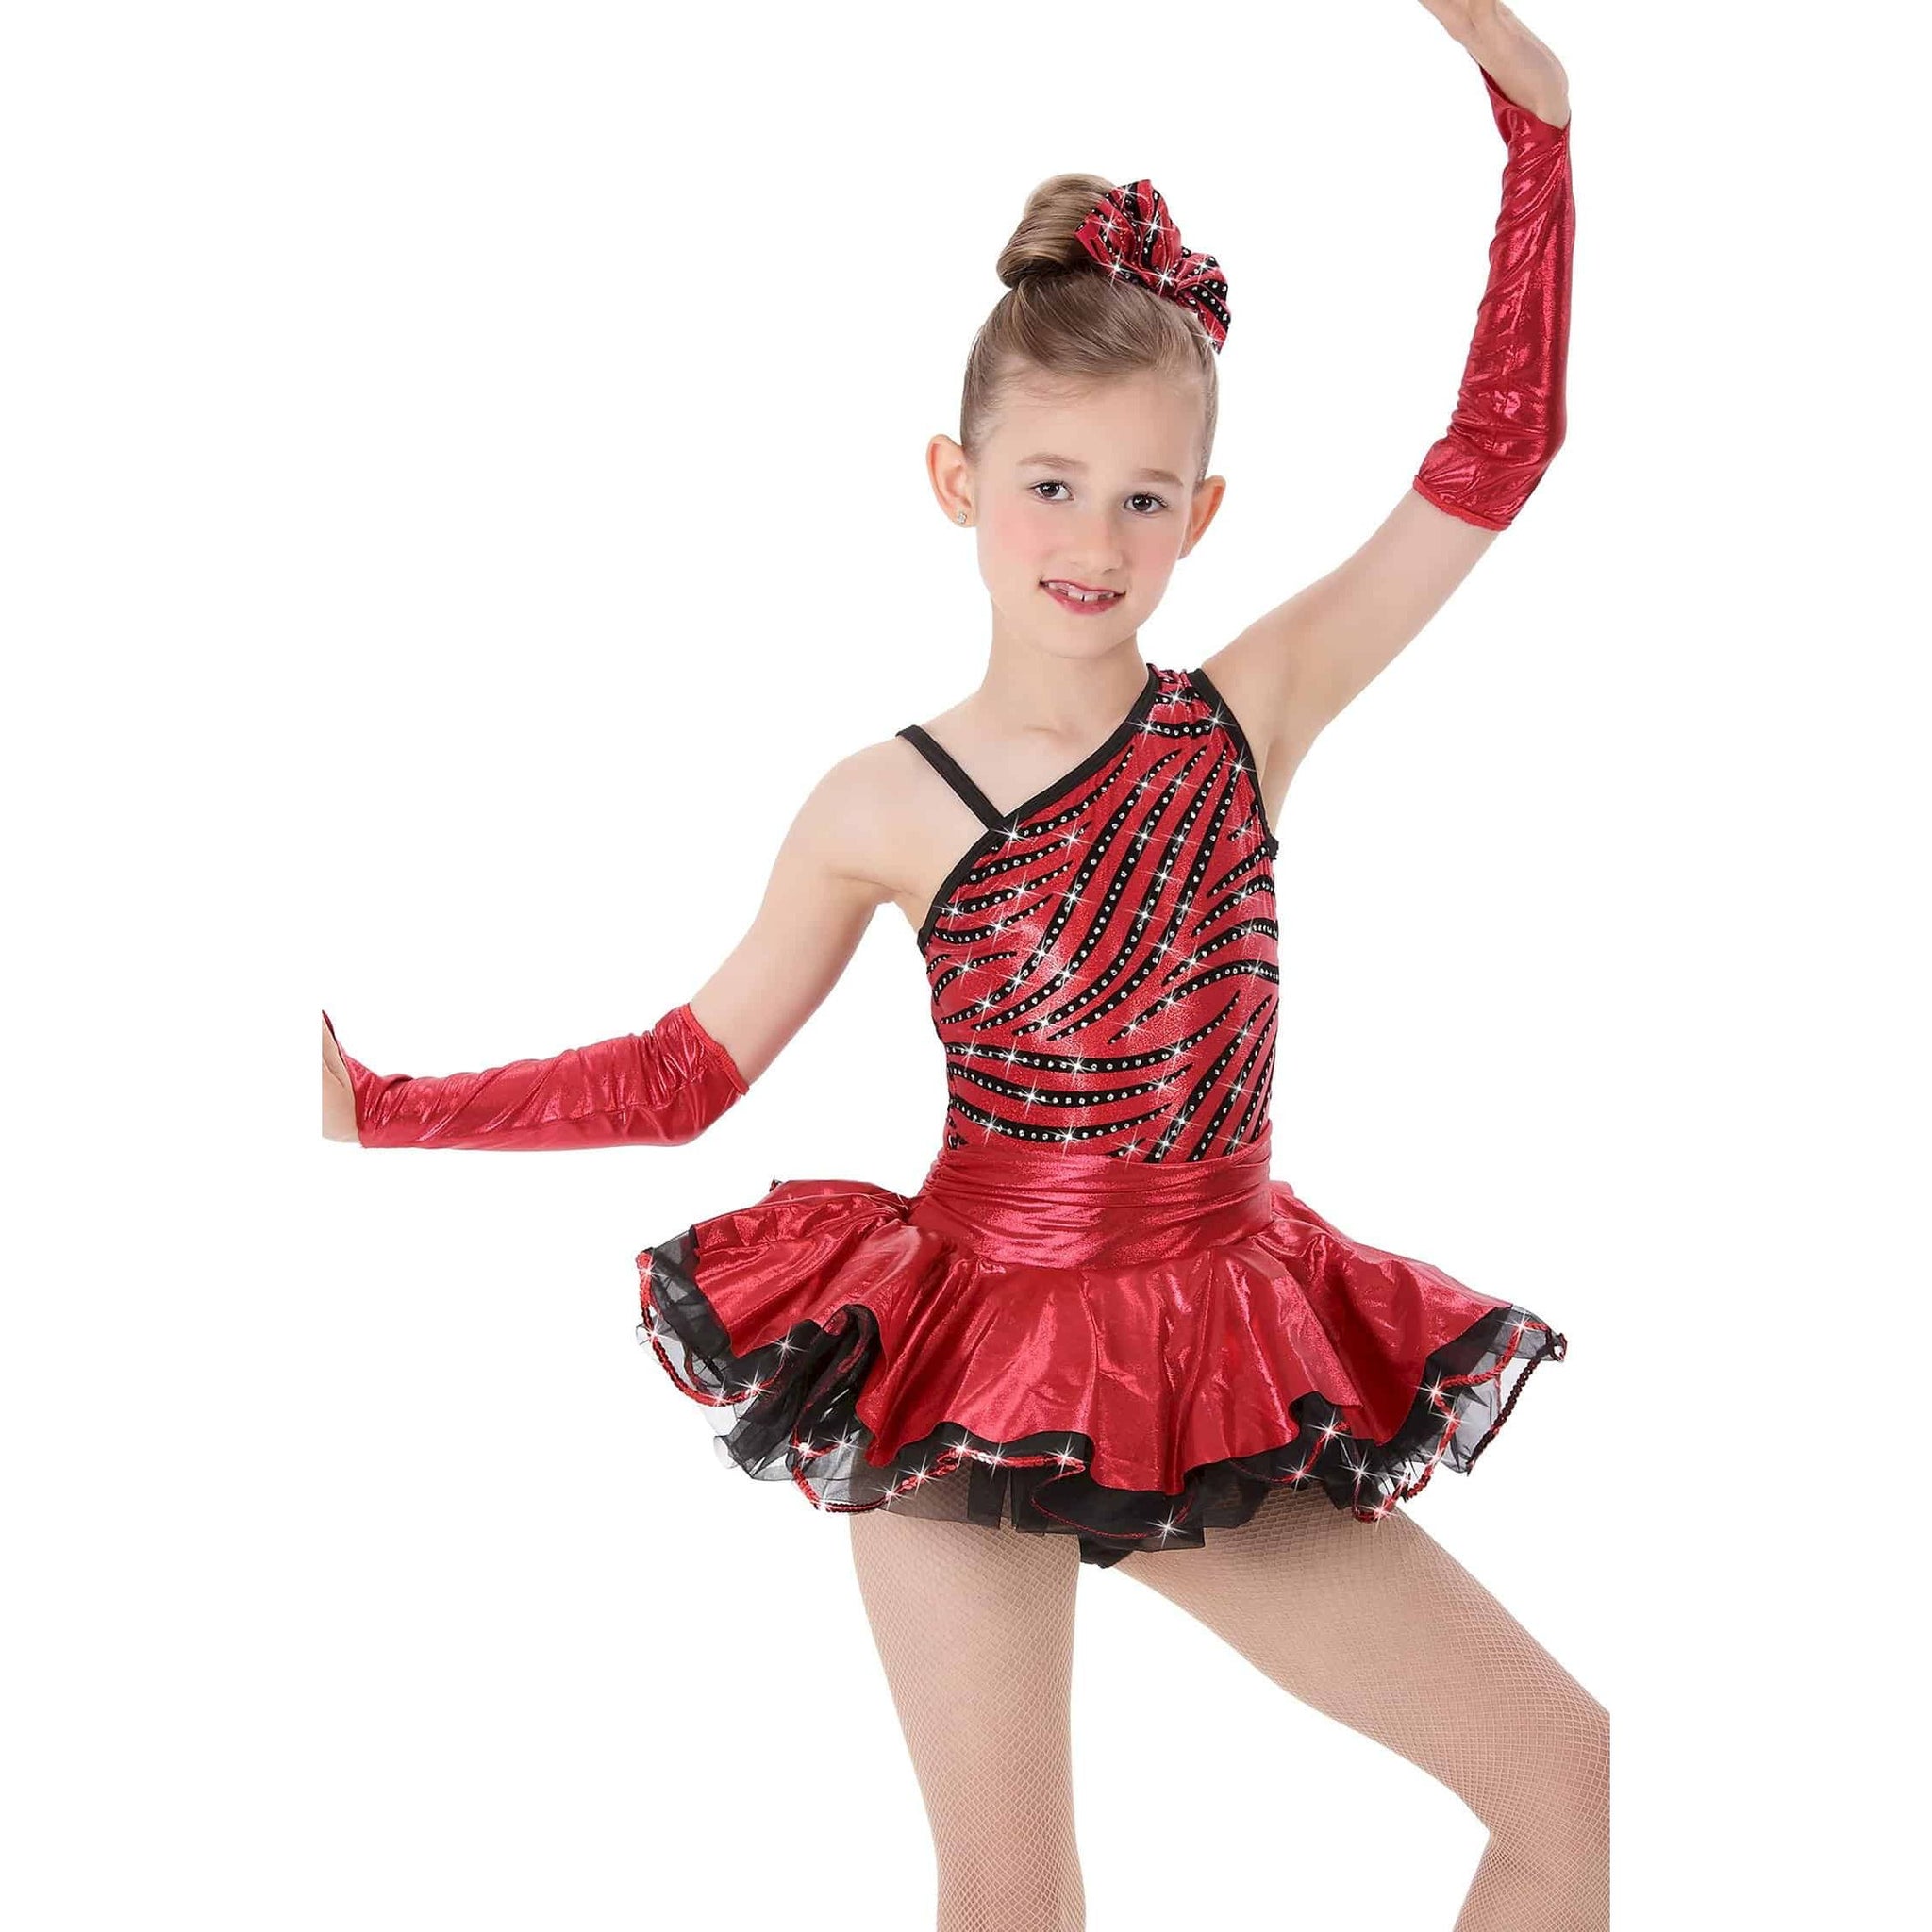 'She's Like No Other' Red & Black Dance Costume